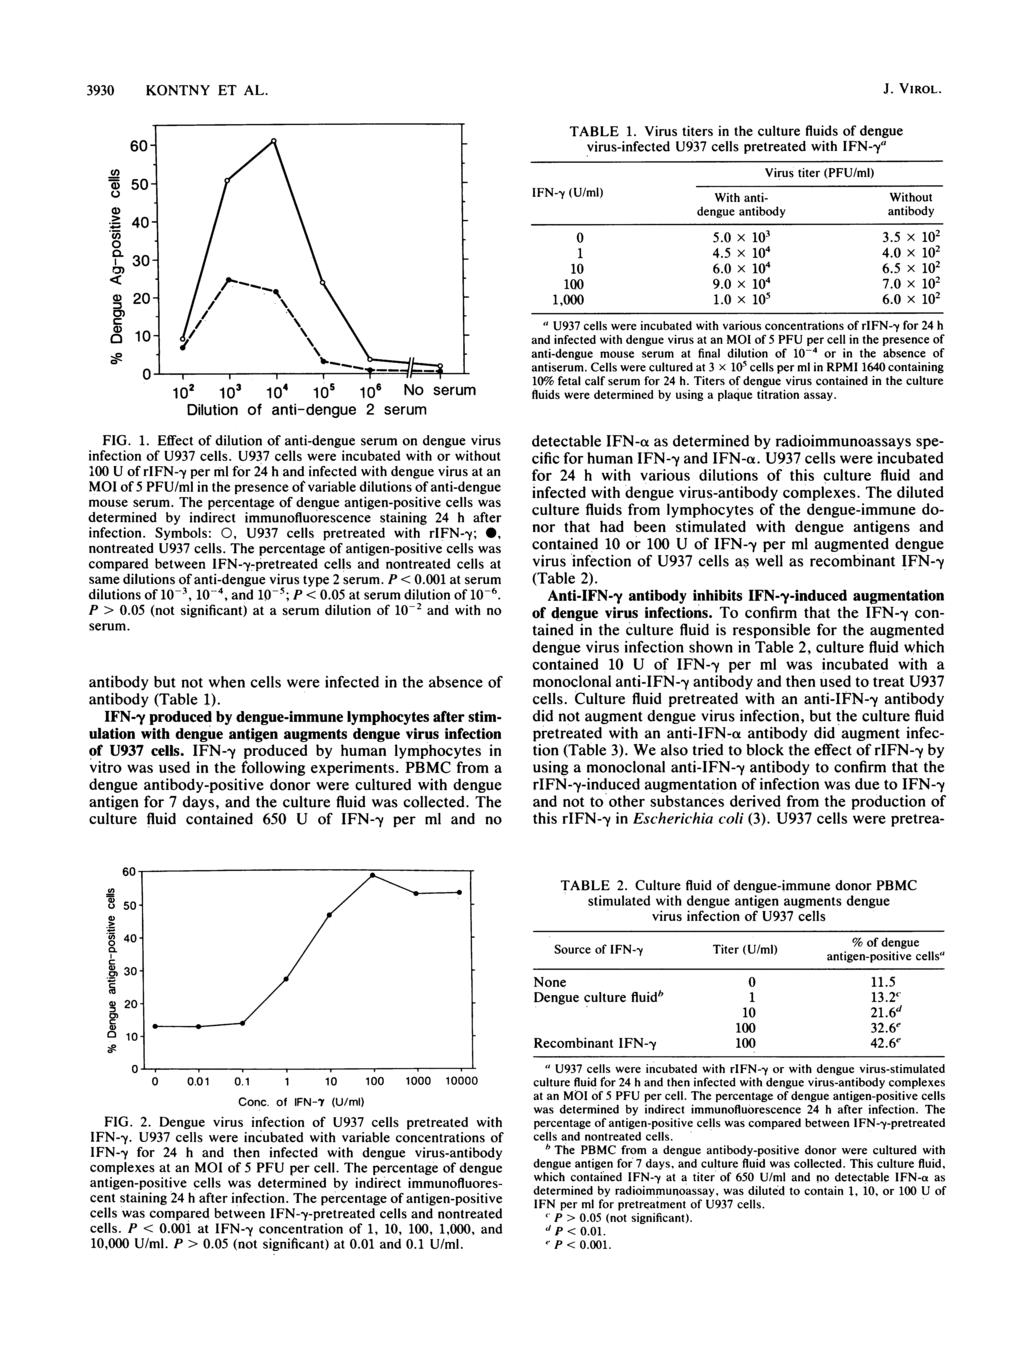 3930 KONTNY ET AL. C1) 0) C-) 0._ a) 0 01) 0) CY) 0) 102 lo, lo4 105 106 No serum Dilution of anti-dengue 2 serum FIG. 1. Effect of dilution of anti-dengue serum on dengue virus infection of U937 cells.